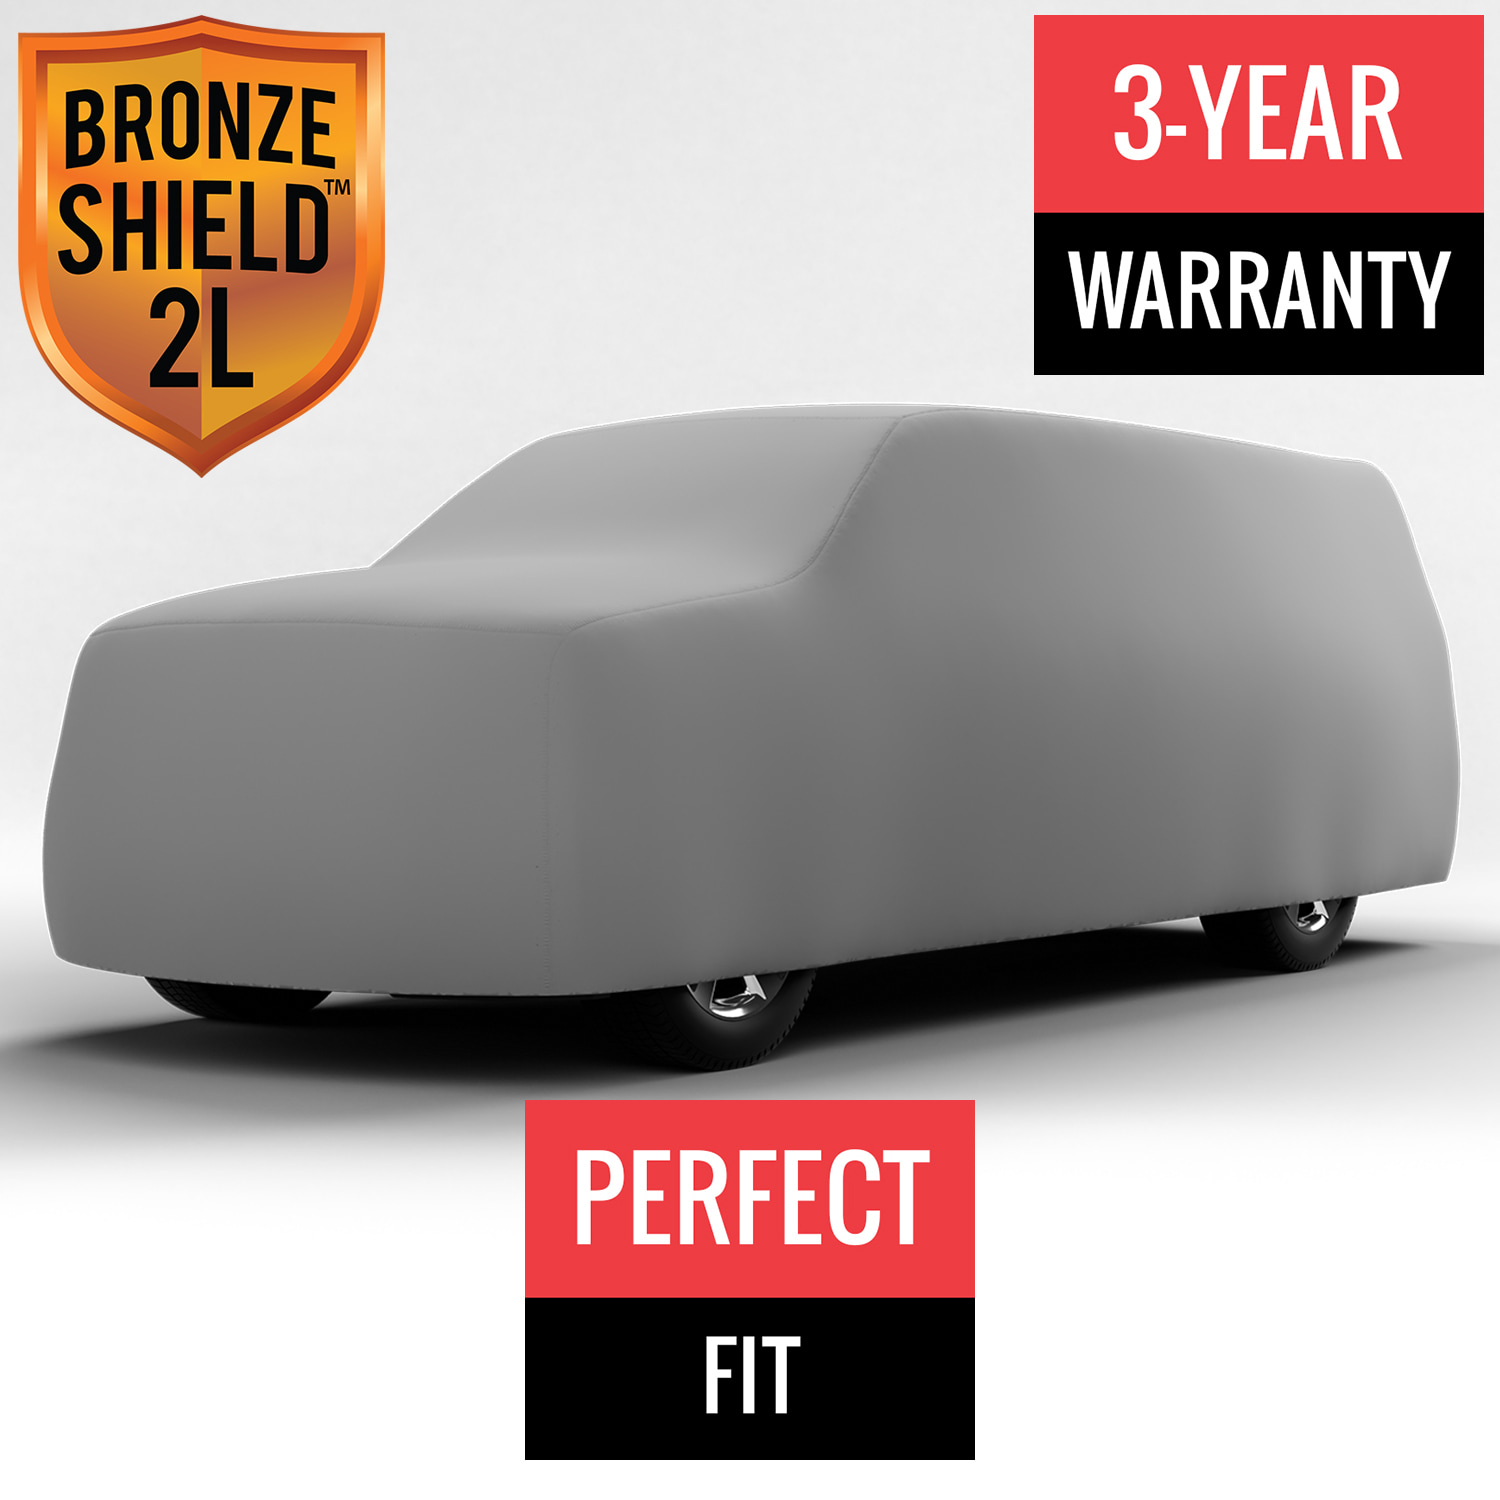 Bronze Shield 2L - Car Cover for GMC C1500 1998 Regular Cab Pickup 8.0 Feet Bed with Camper Shell